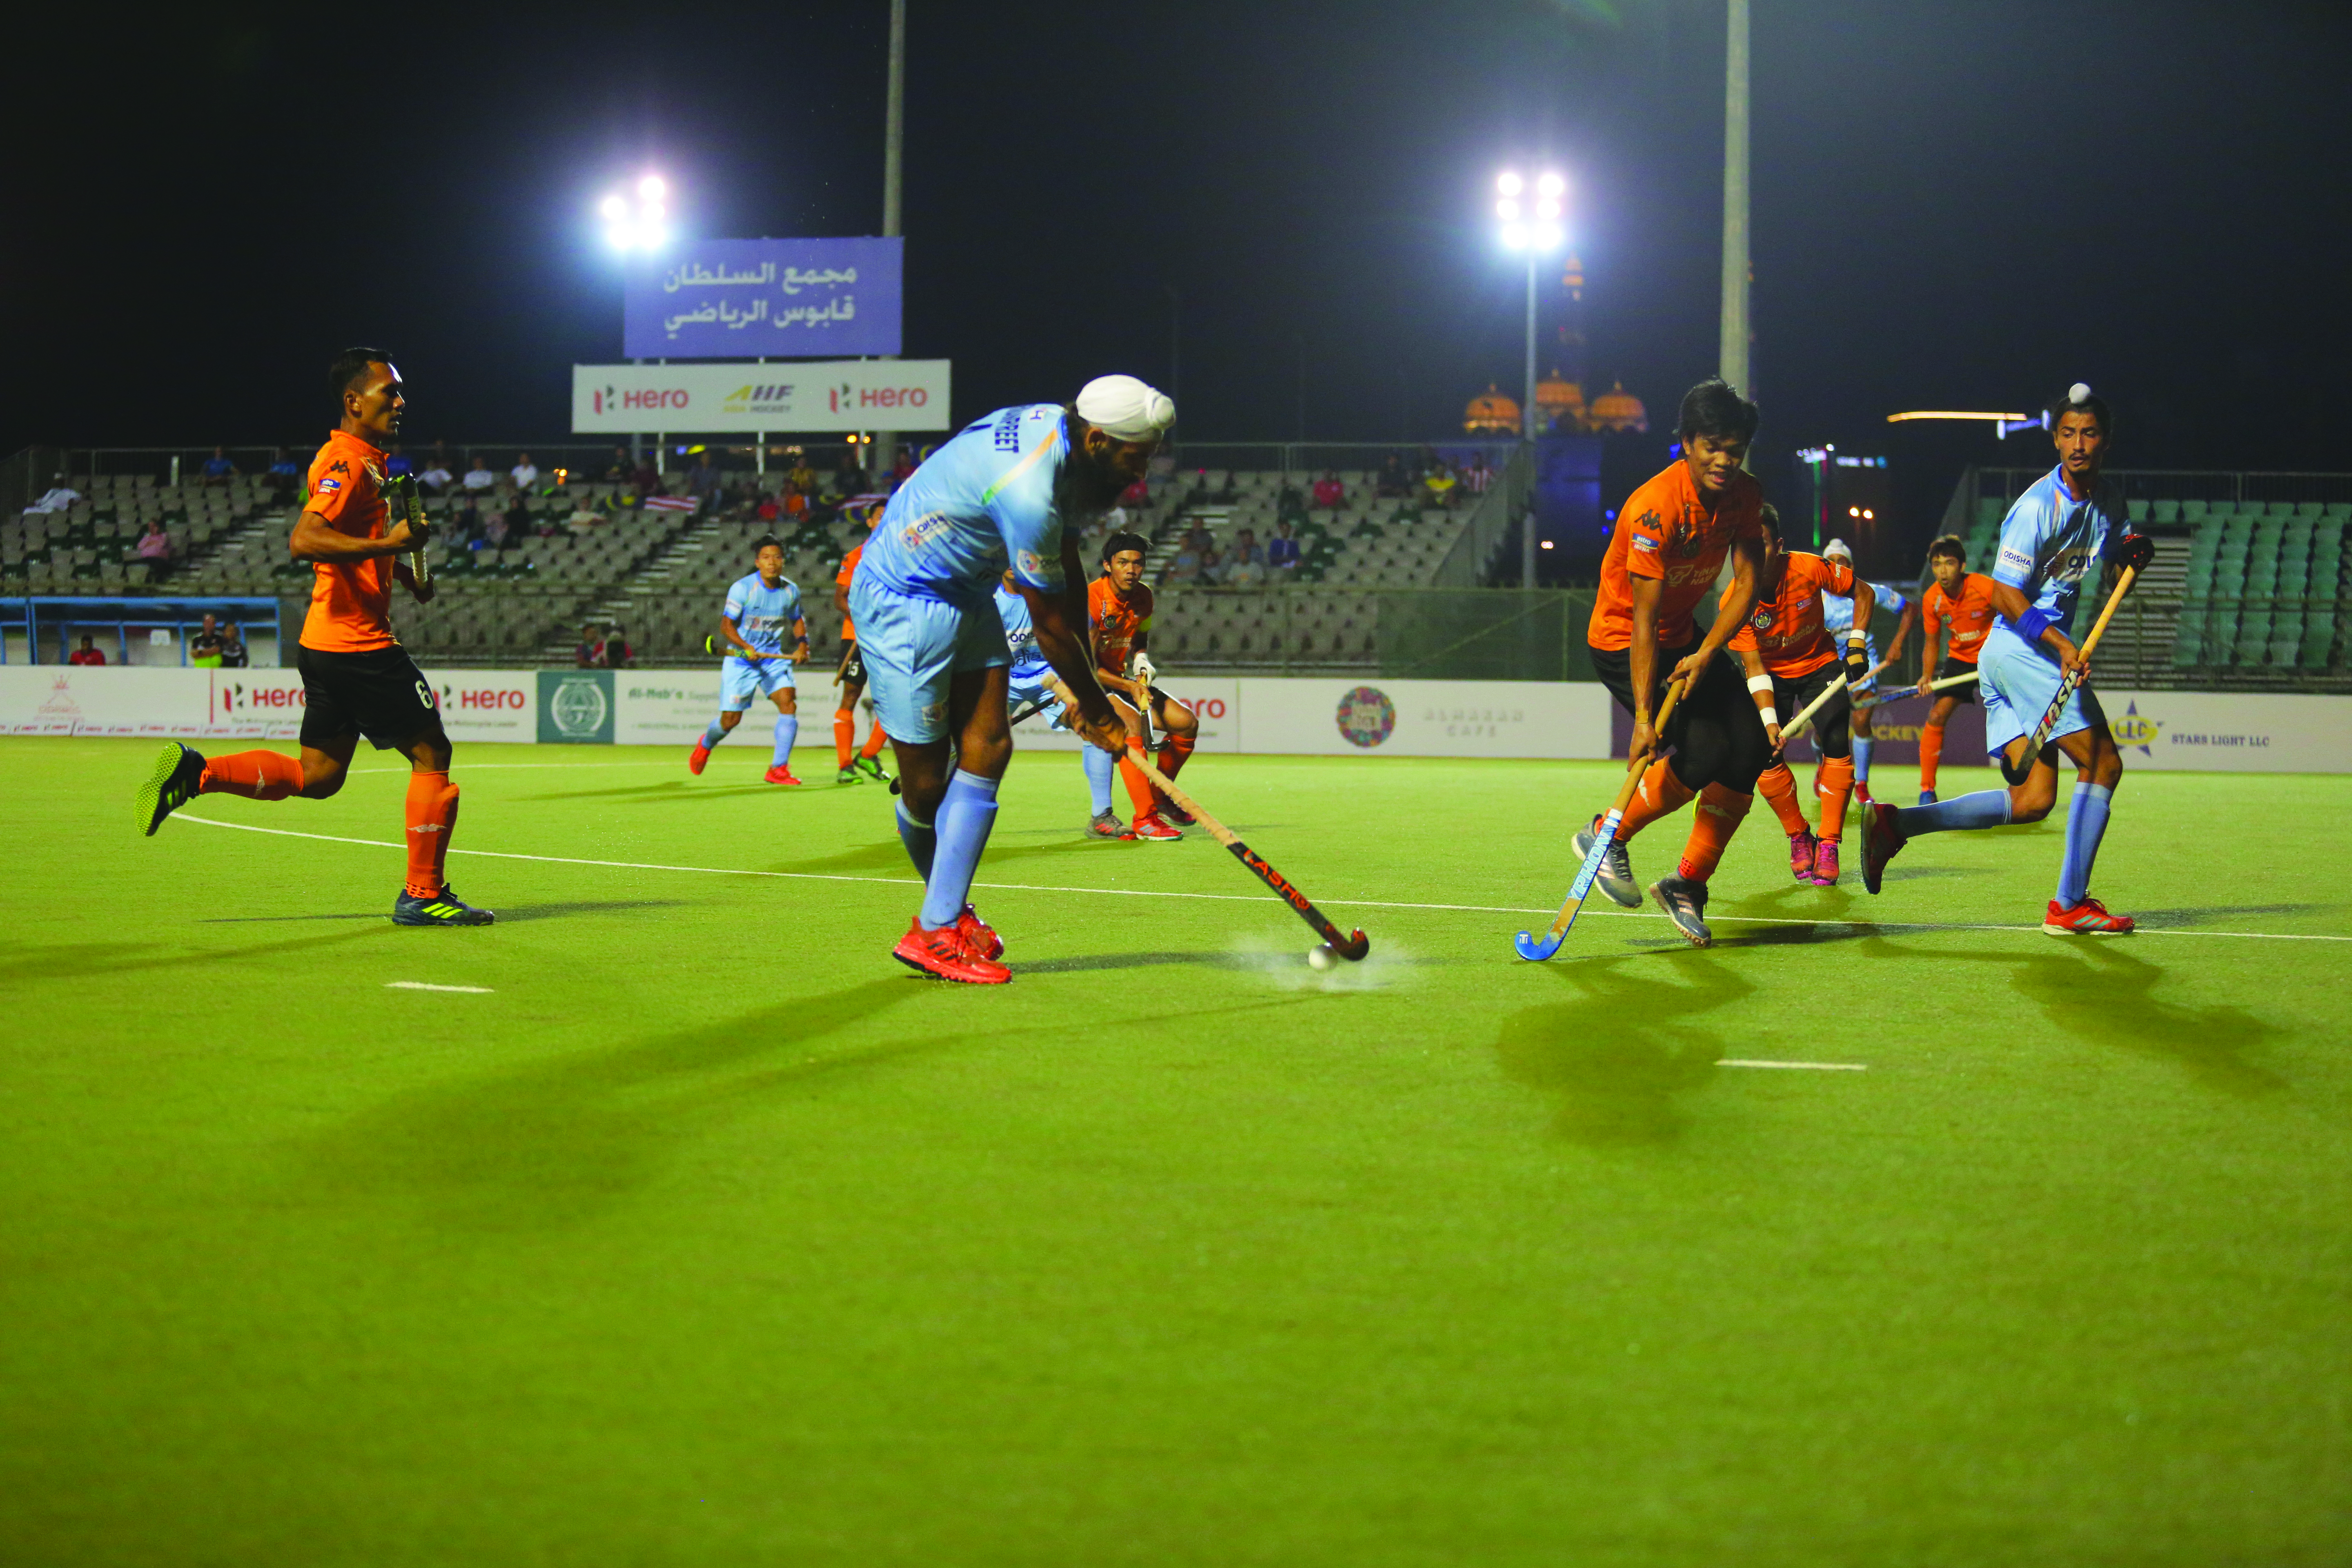 Hockey: India, Malaysia play out dour draw in Asian Games rematch